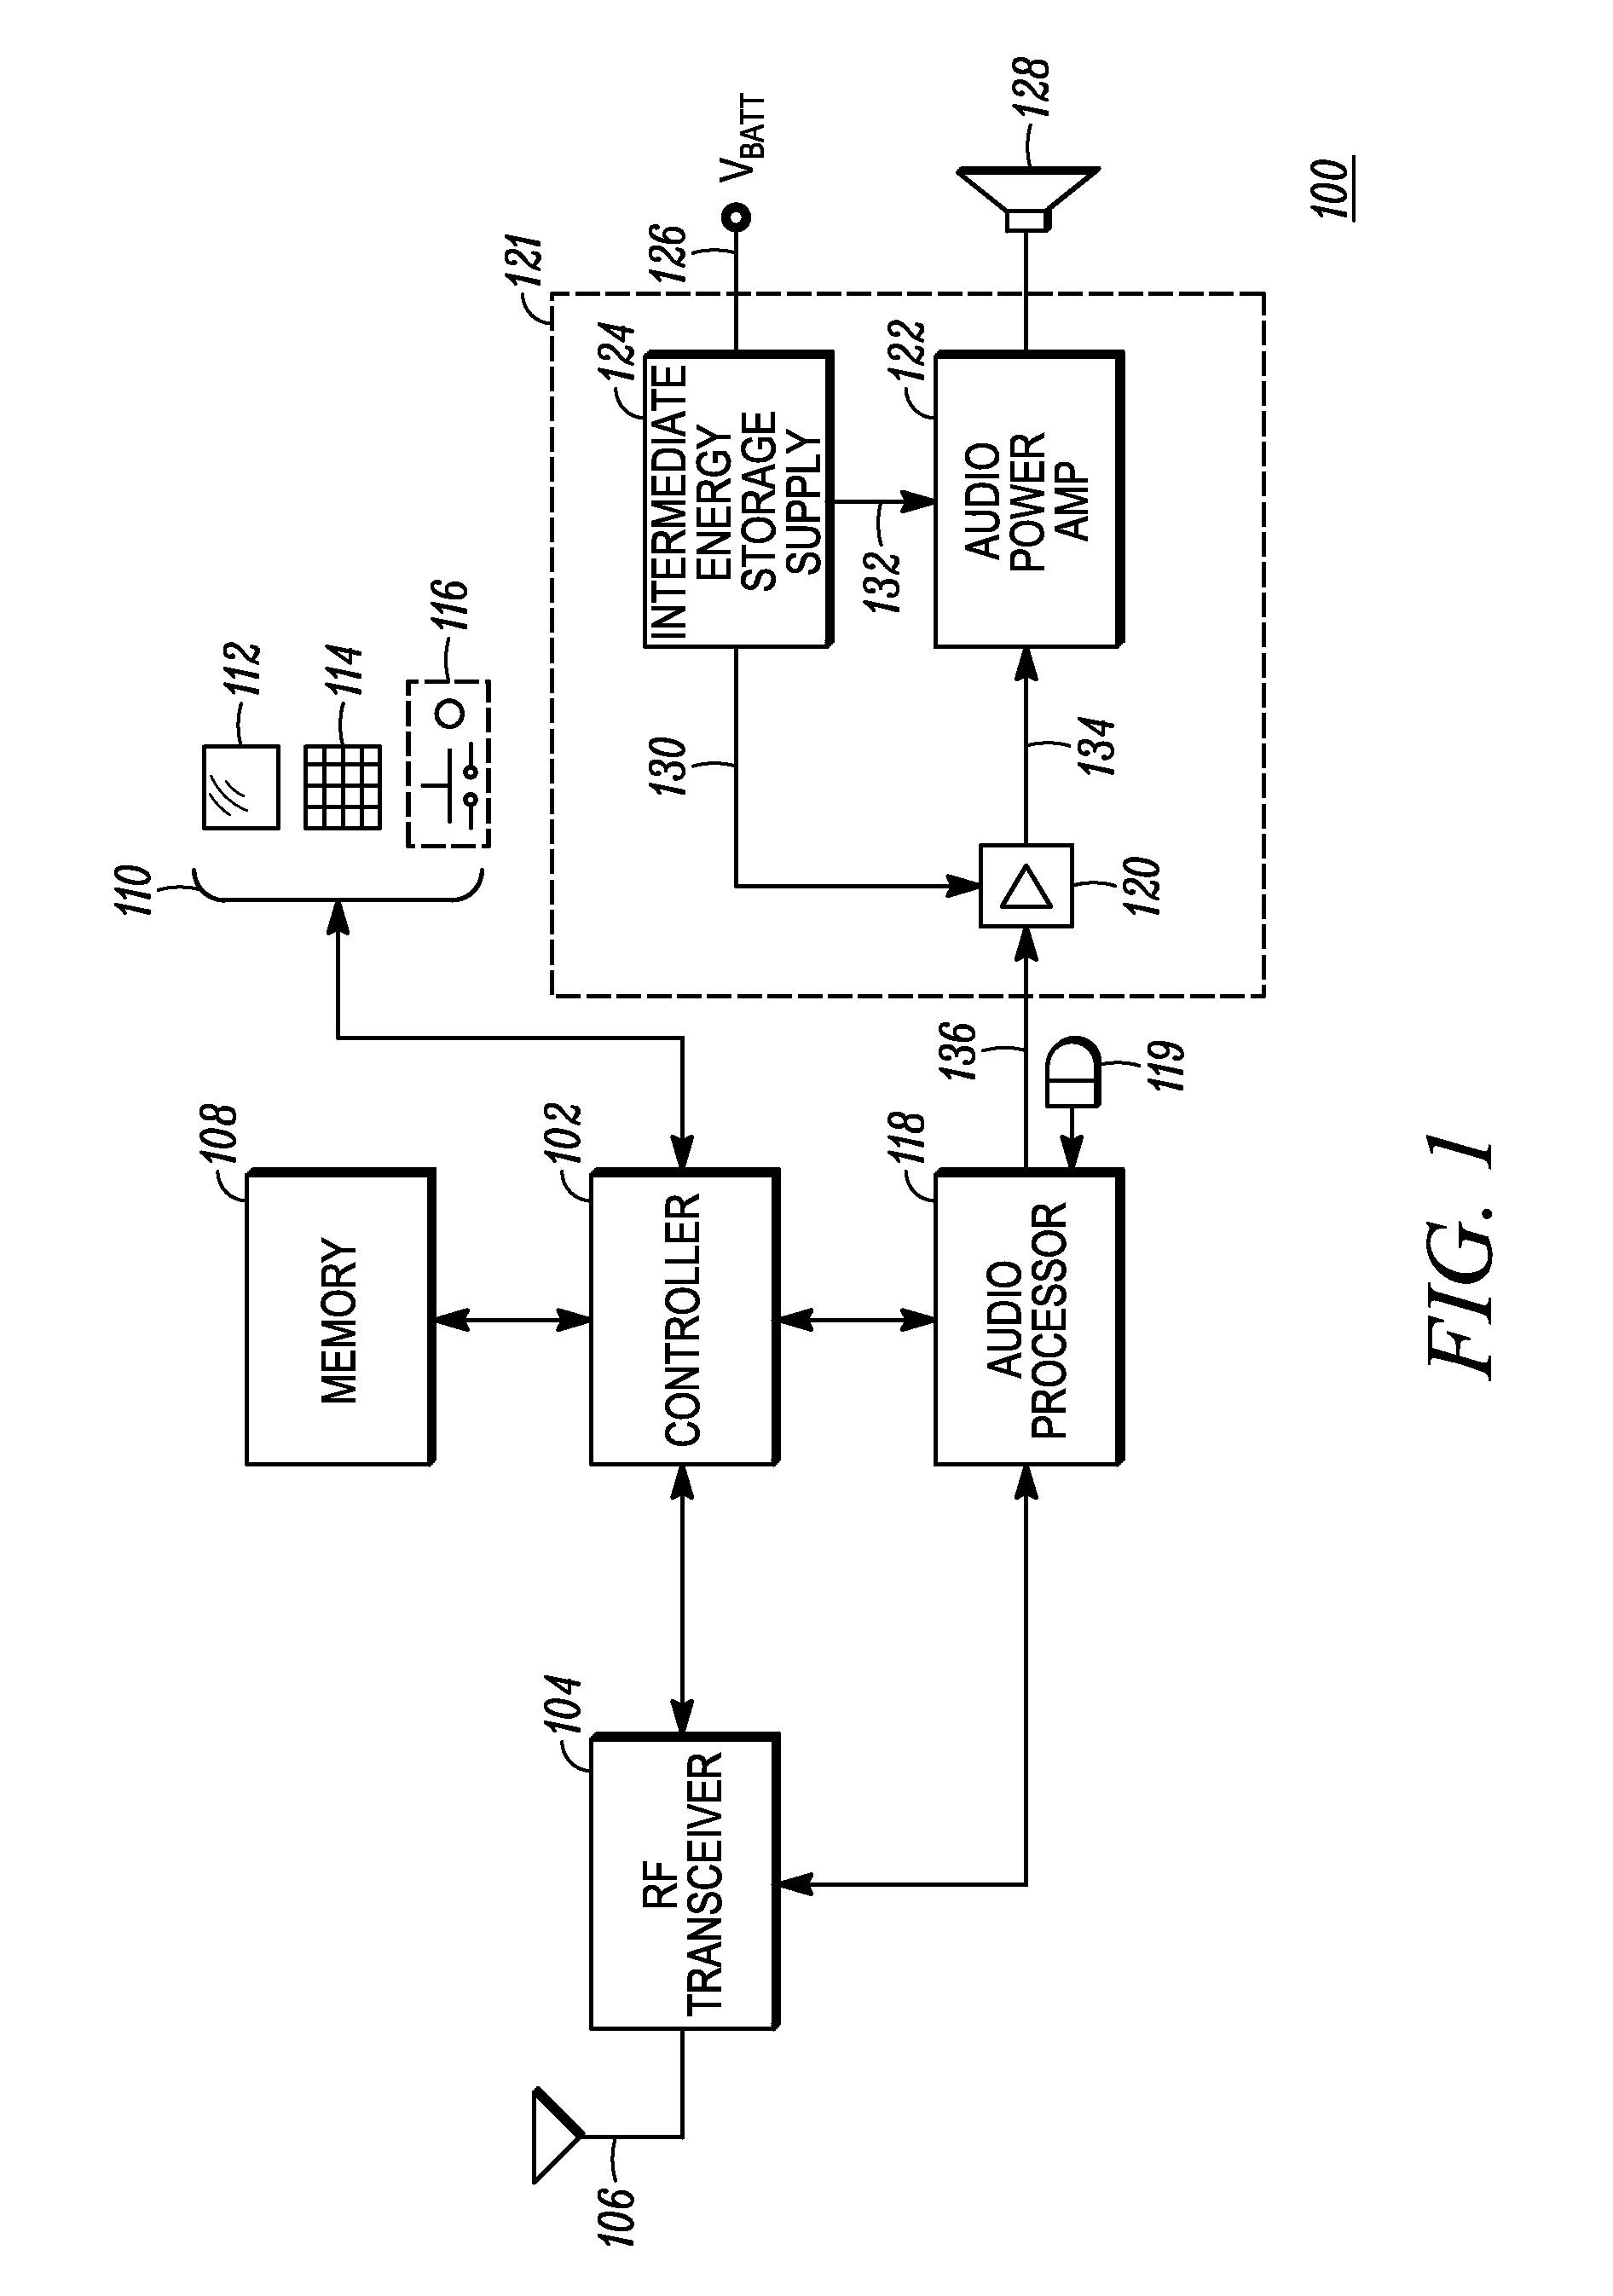 Input current limited power supply and audio power amplifier for high power reproduction of nondeterministic signals